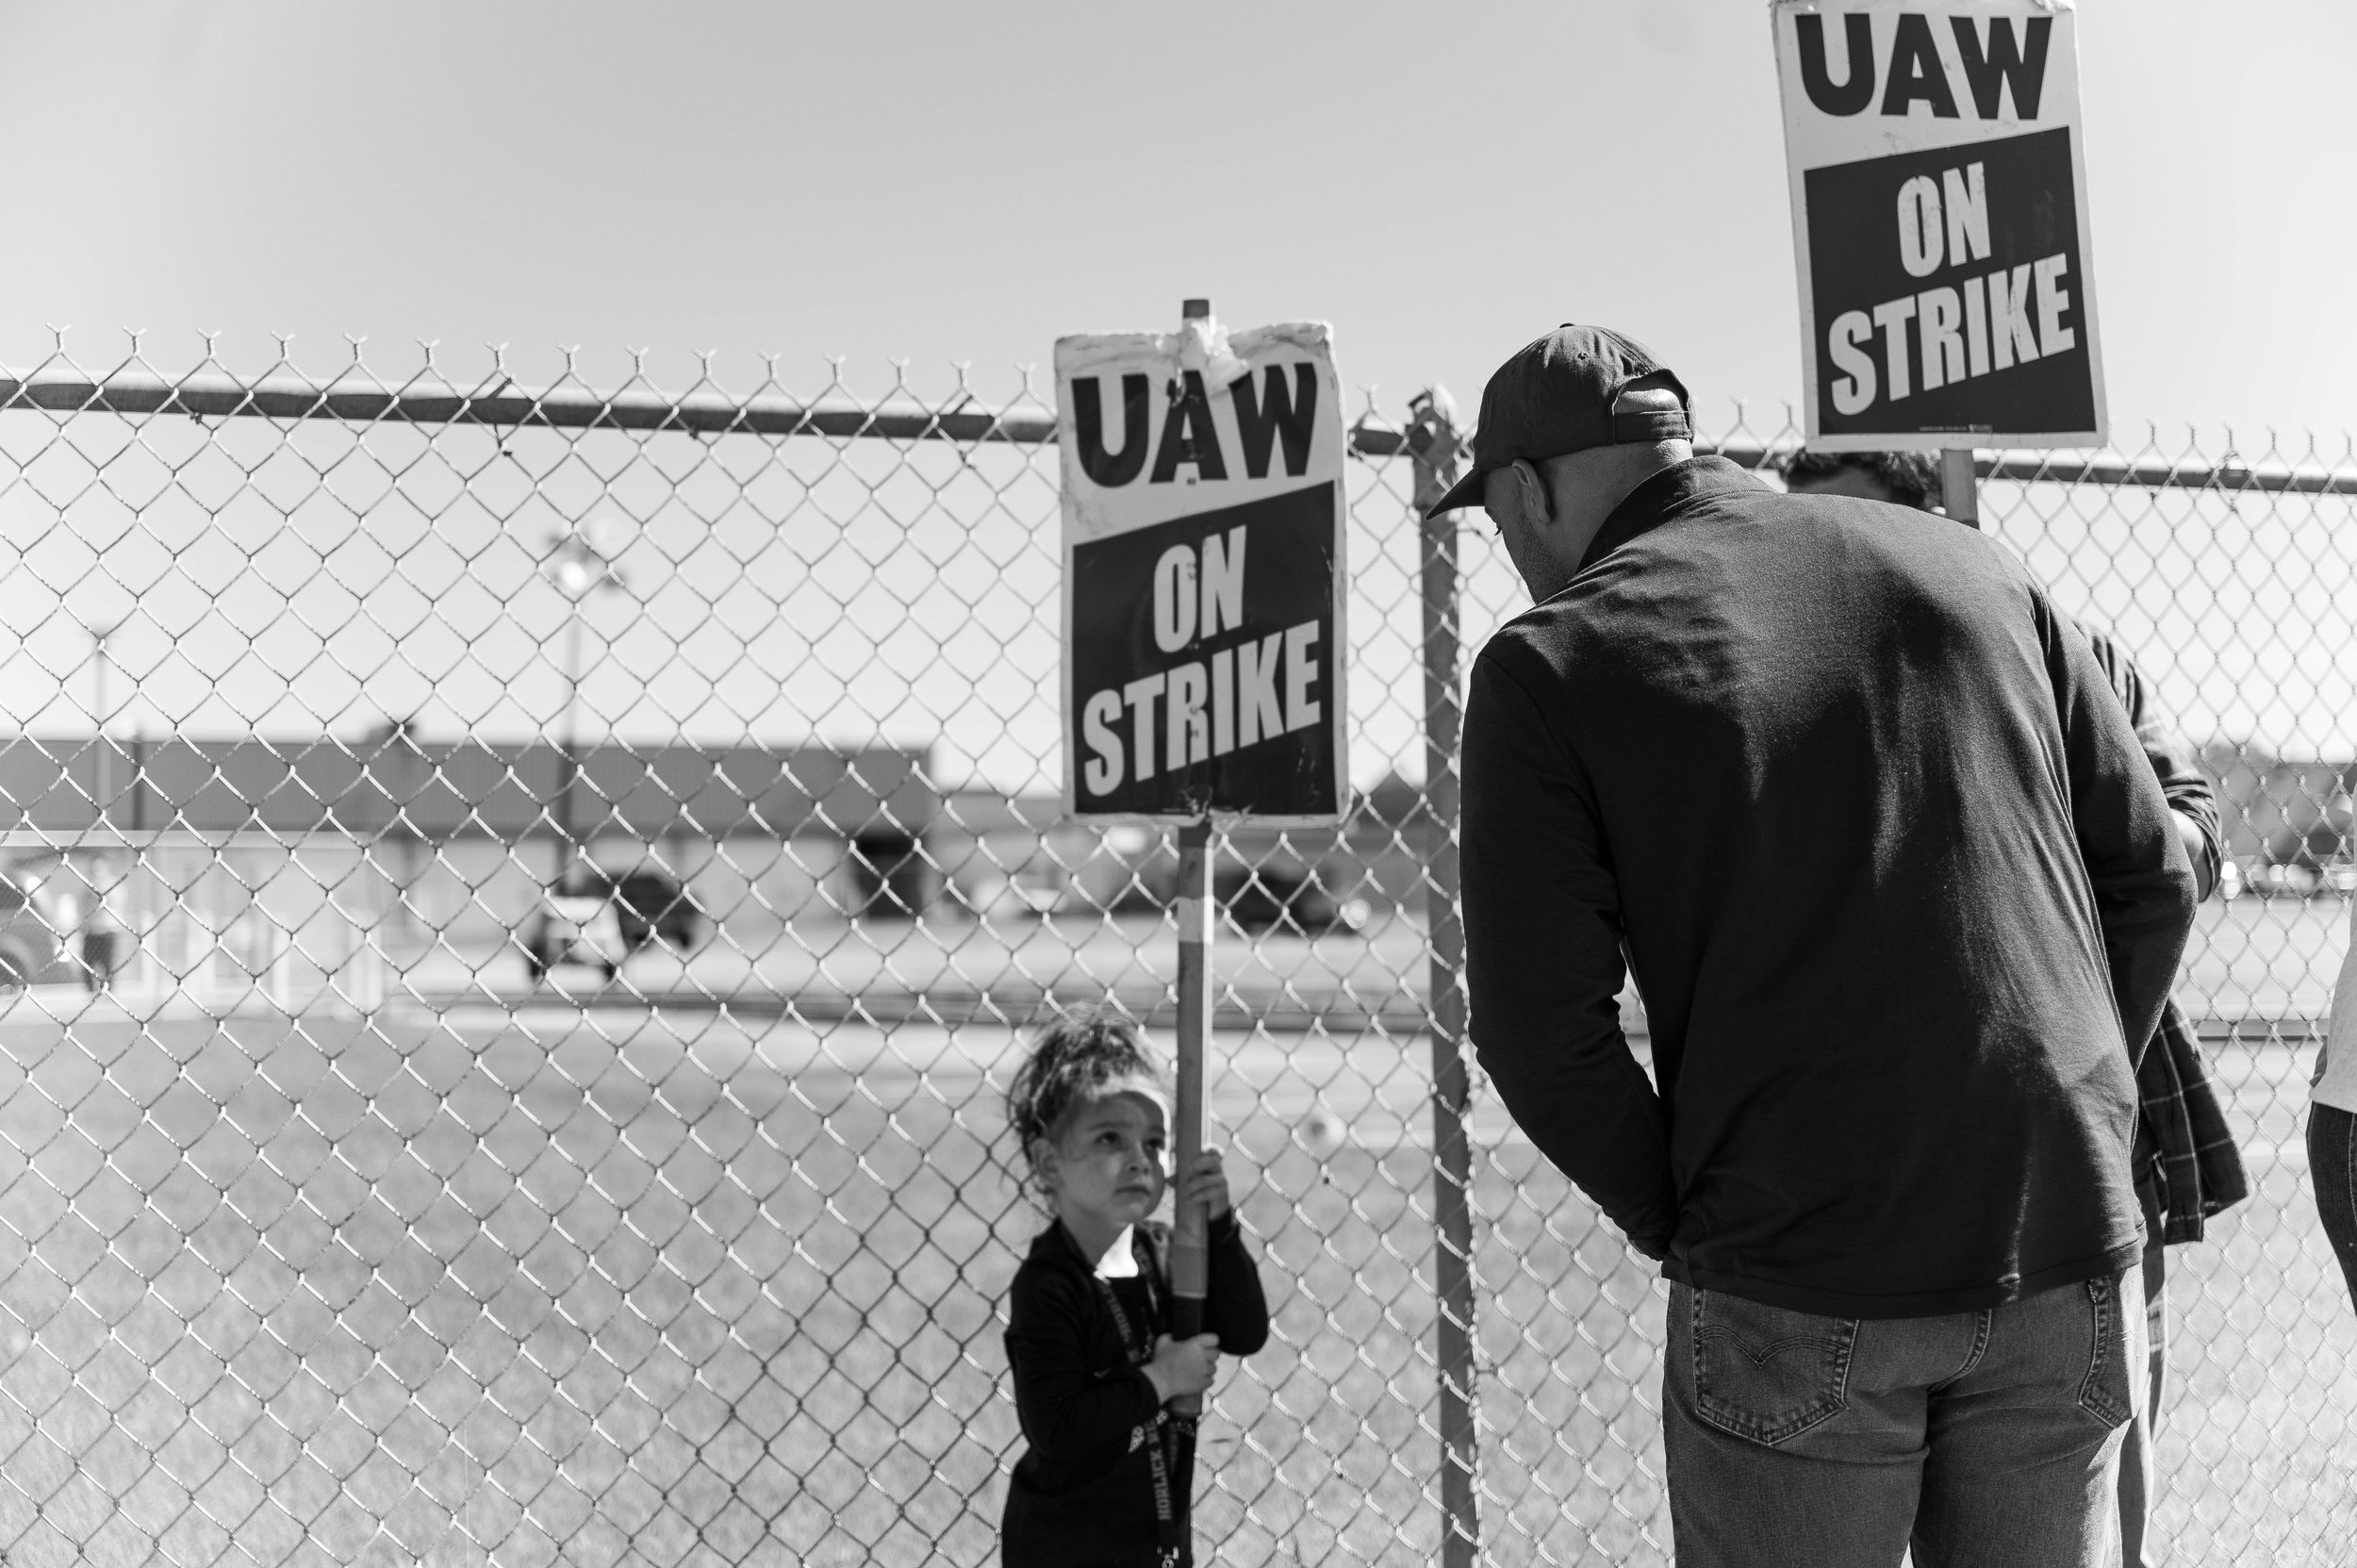 Democratic nominee for U.S. Senate, Lt. Governor Mandela Barnes speakers to the daughter of a CNH worker at a UAW Strike in Wisconsin, 2022